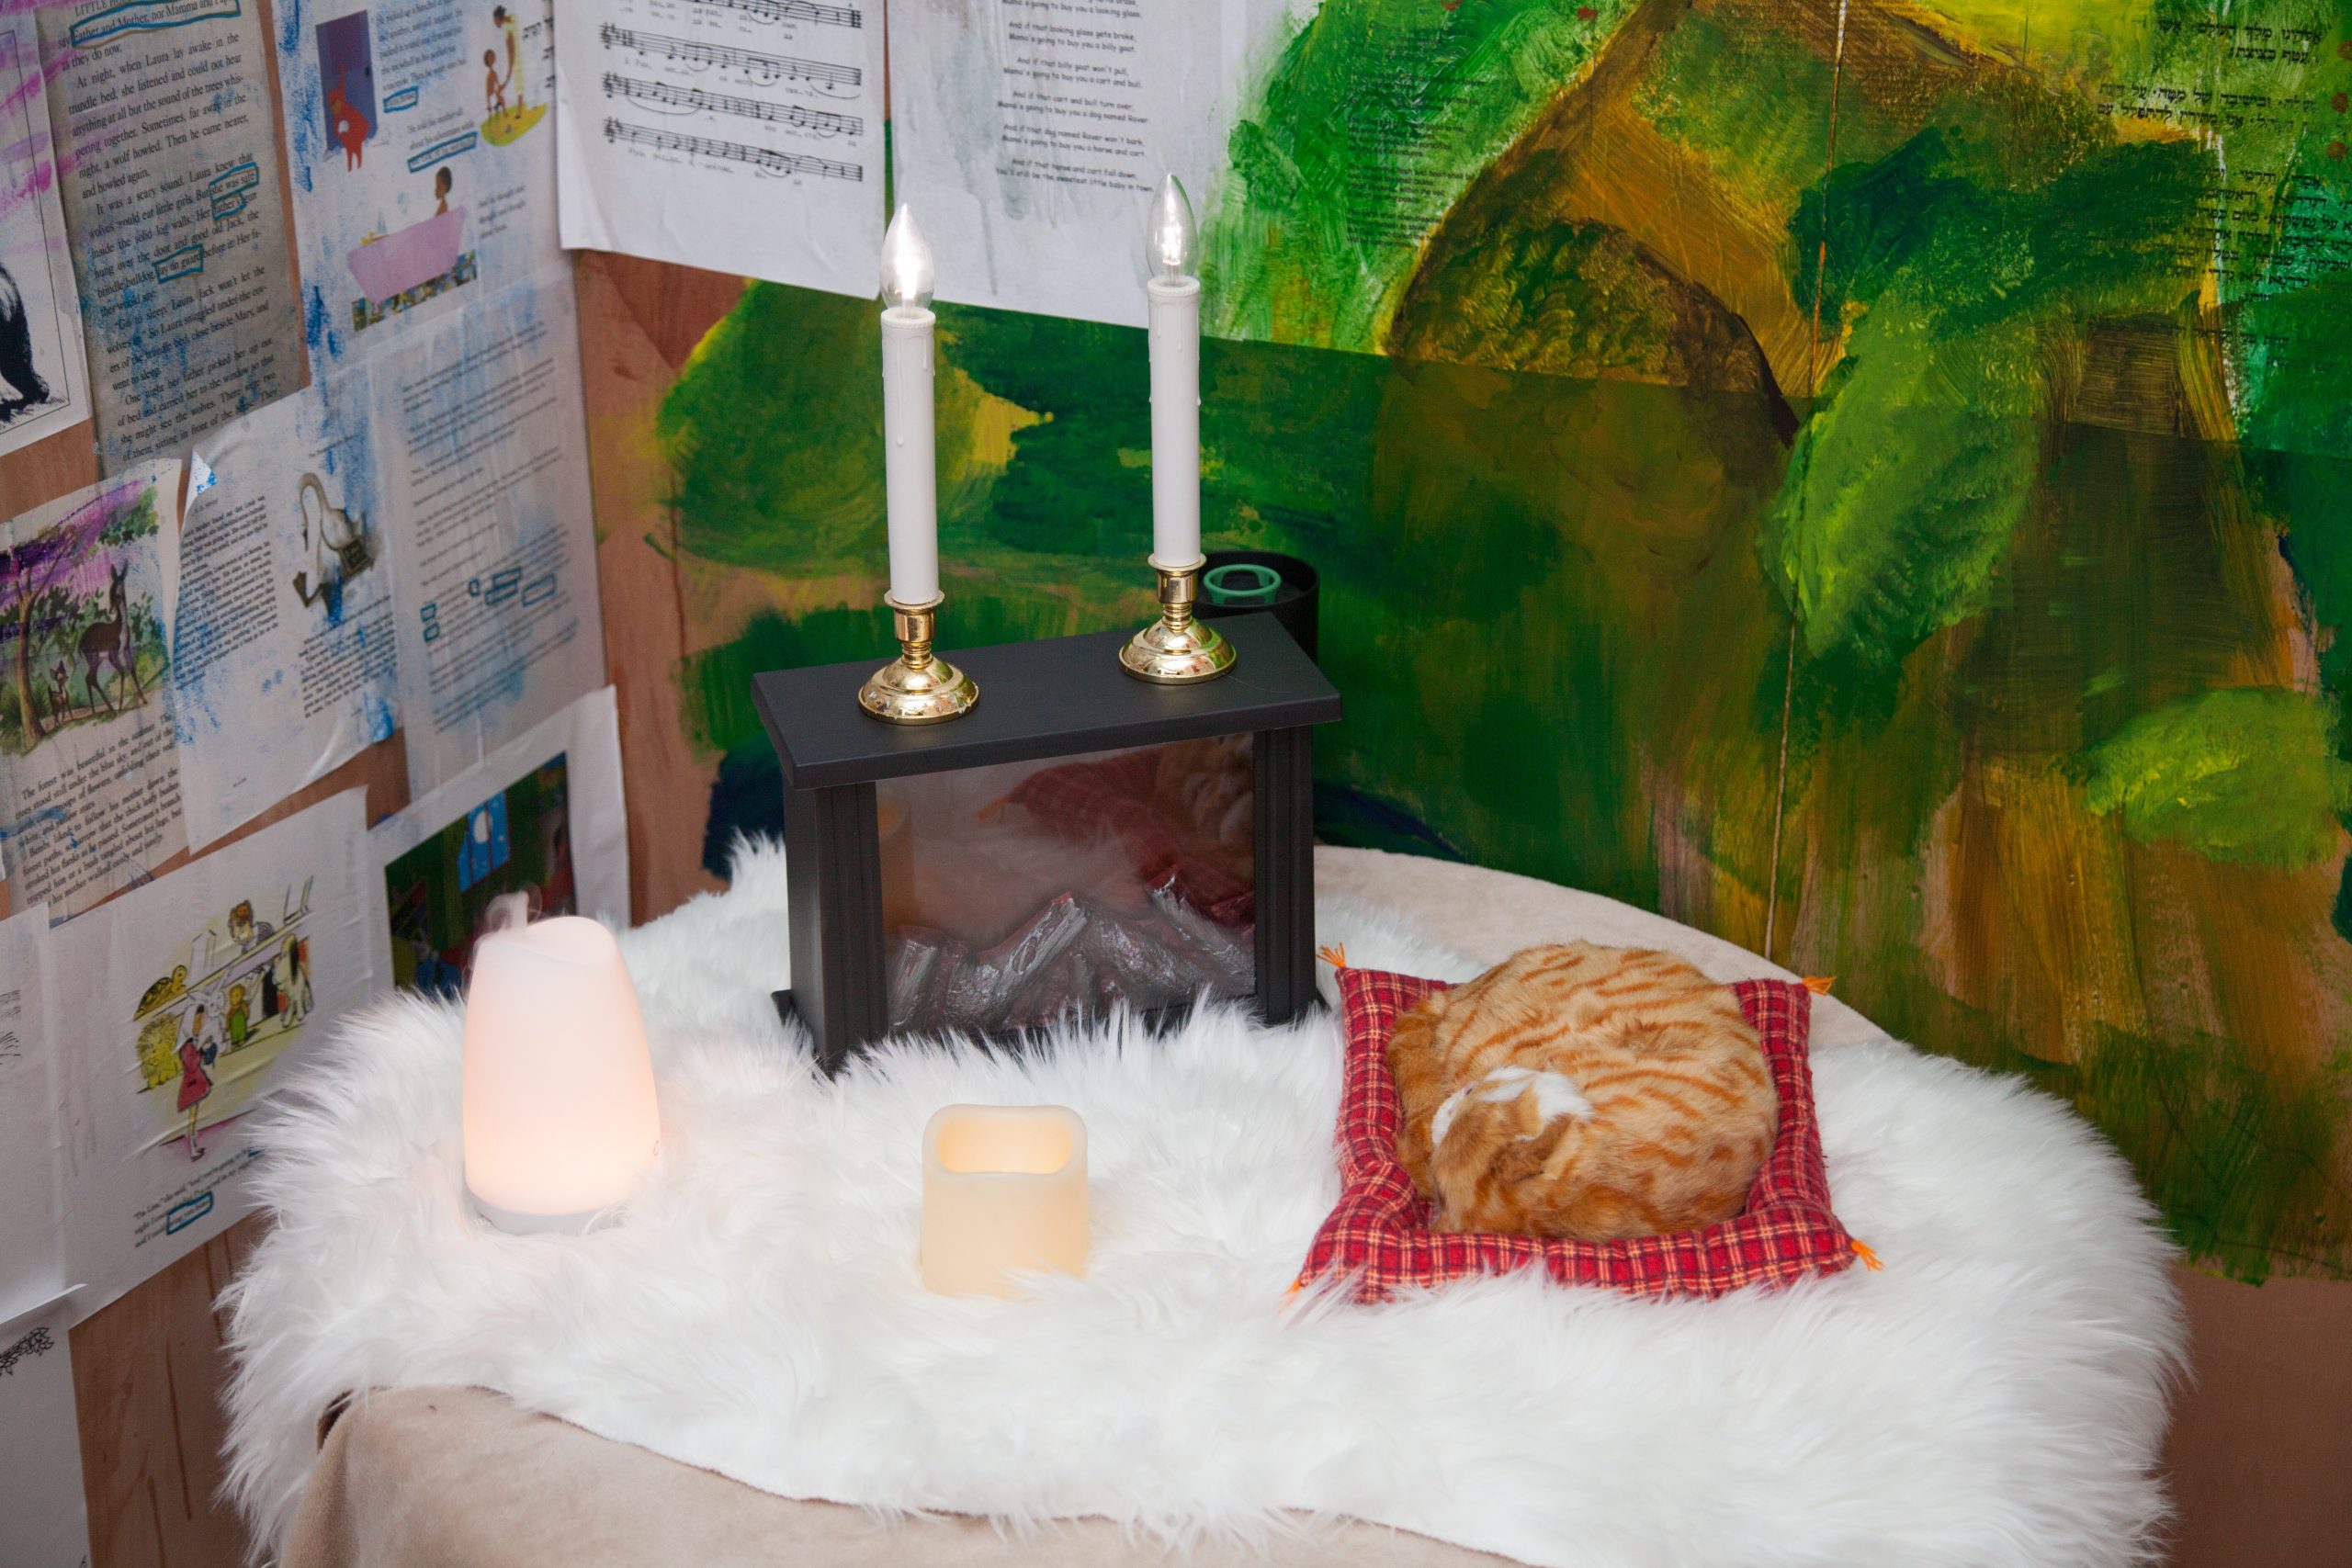 A shrine is placed in the corner of a room. Objects have been placed on a round surface covered by a white fluffy blanket.